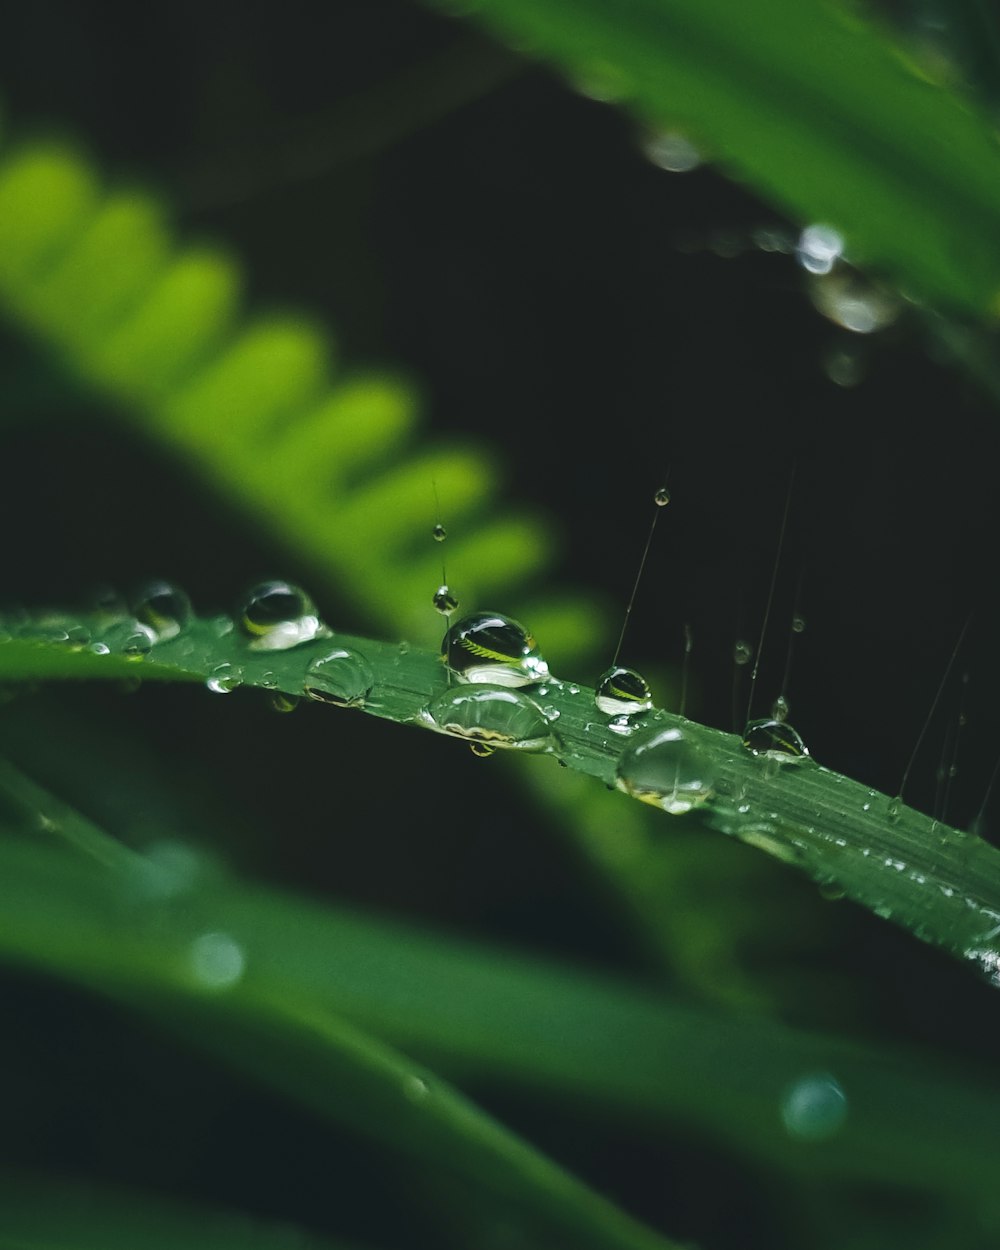 a close up of a green leaf with water drops